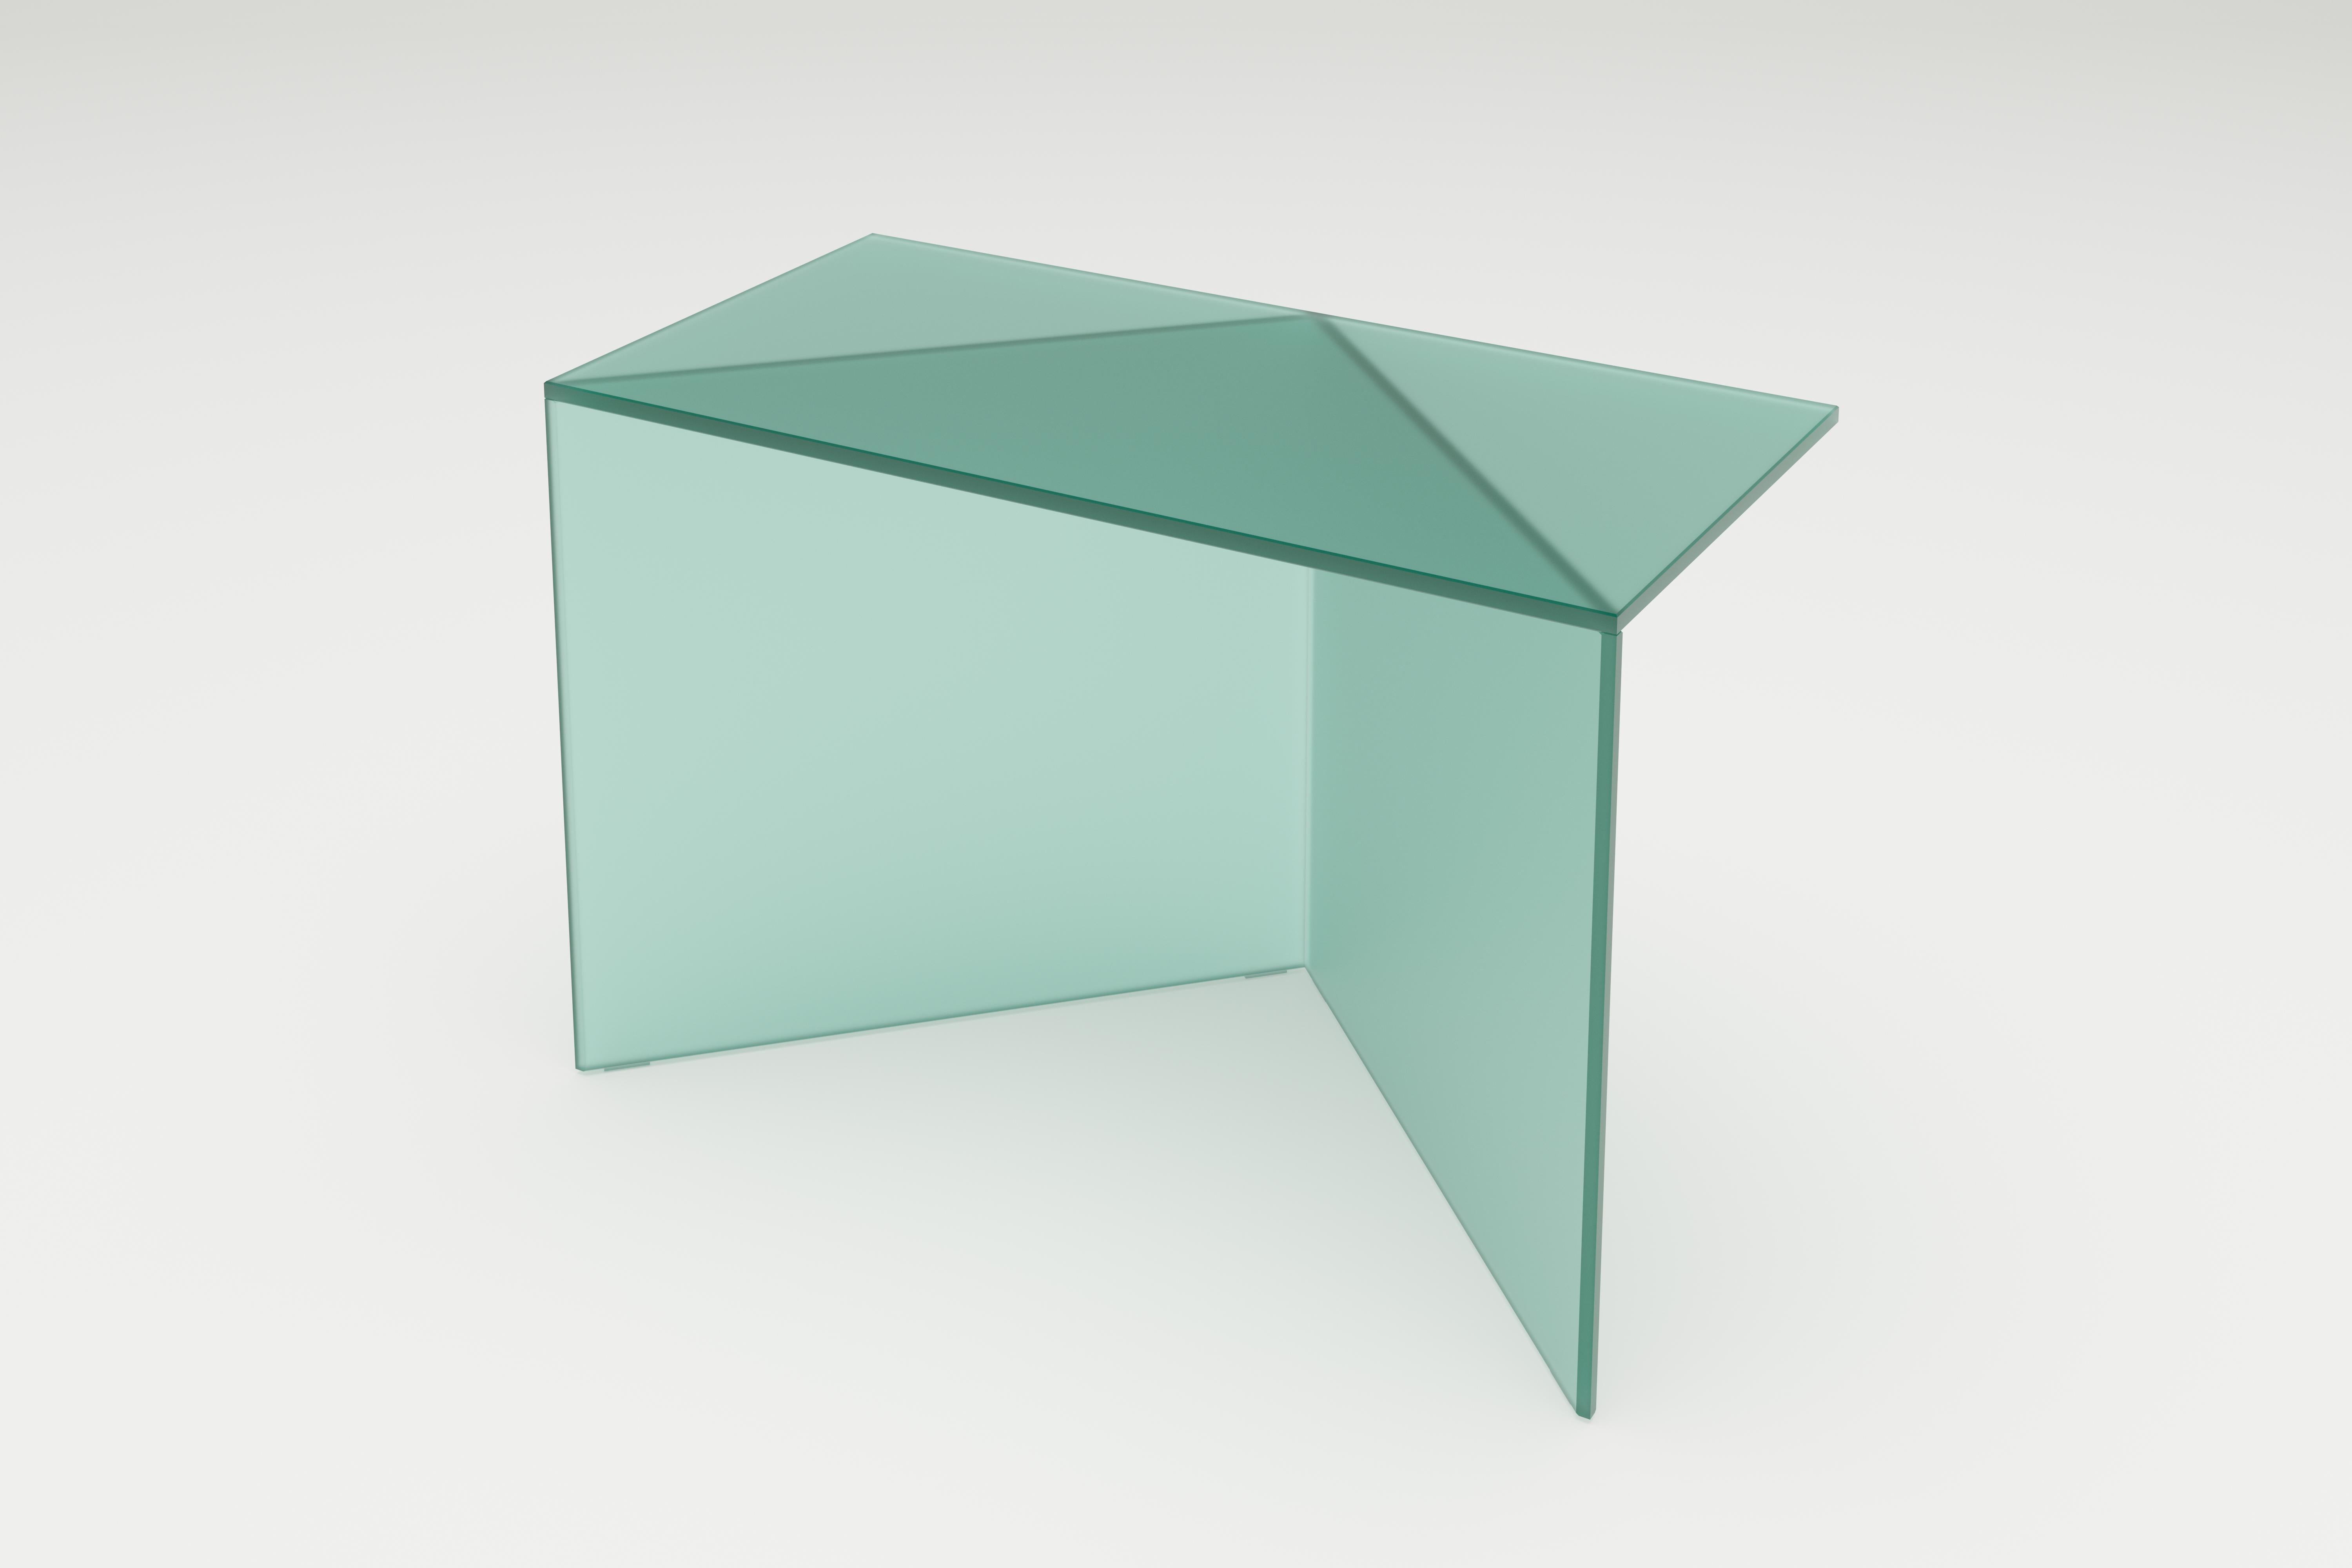 Green satin glass poly square coffe table by Sebastian Scherer
Dimensions: D60 x W30 x H40 cm
Materials: Solid coloured glass.
Weight: 12.7 kg.
Also Available: Satin white / satin green / satin blue / satin bronze / satin black.
Also Available